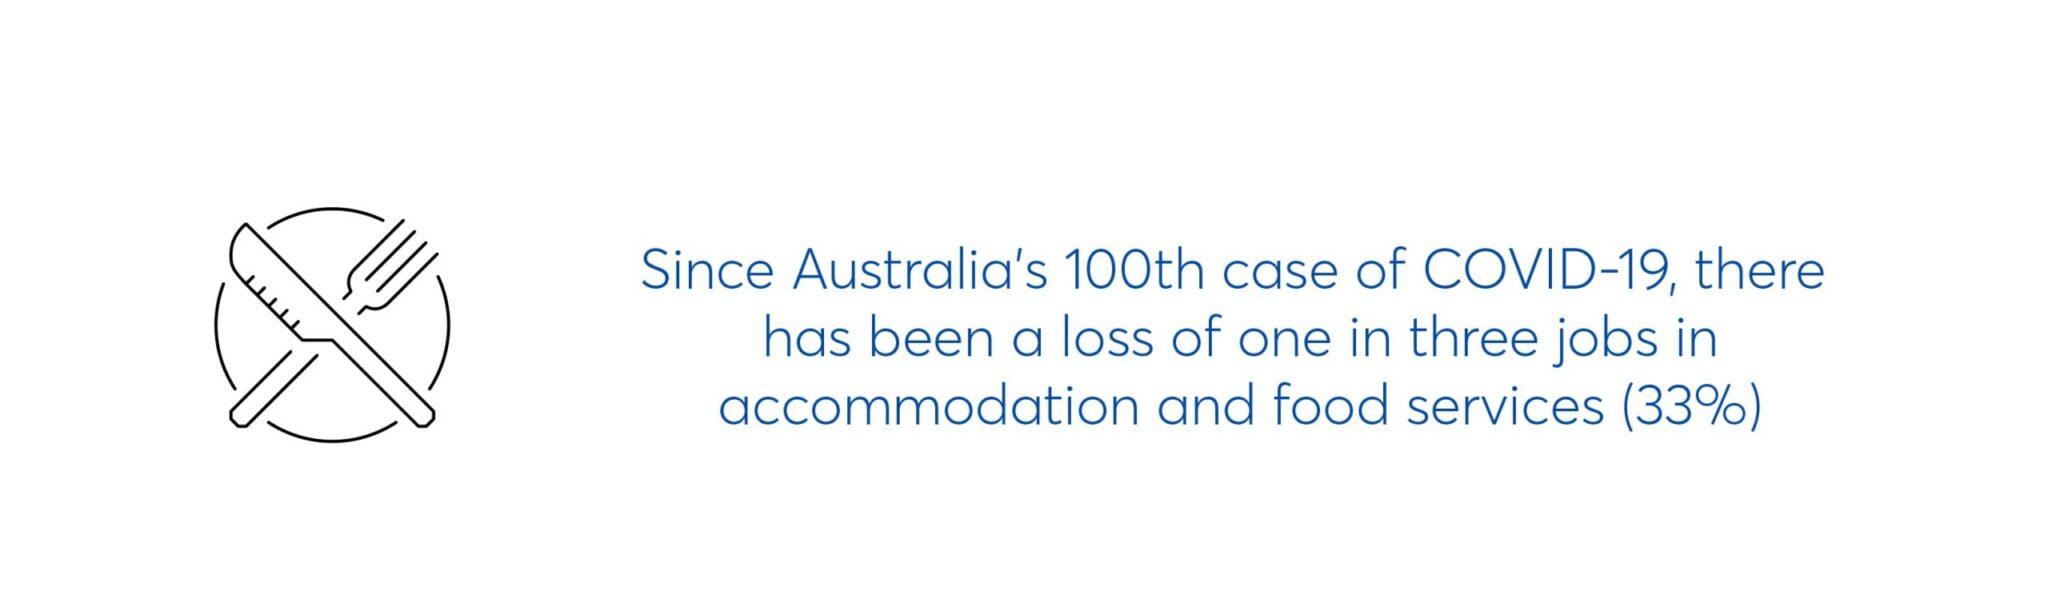 text image which says since australia's 100th case of covid19, there has been a loss of one in three jobs in accomodation and food services (33%)